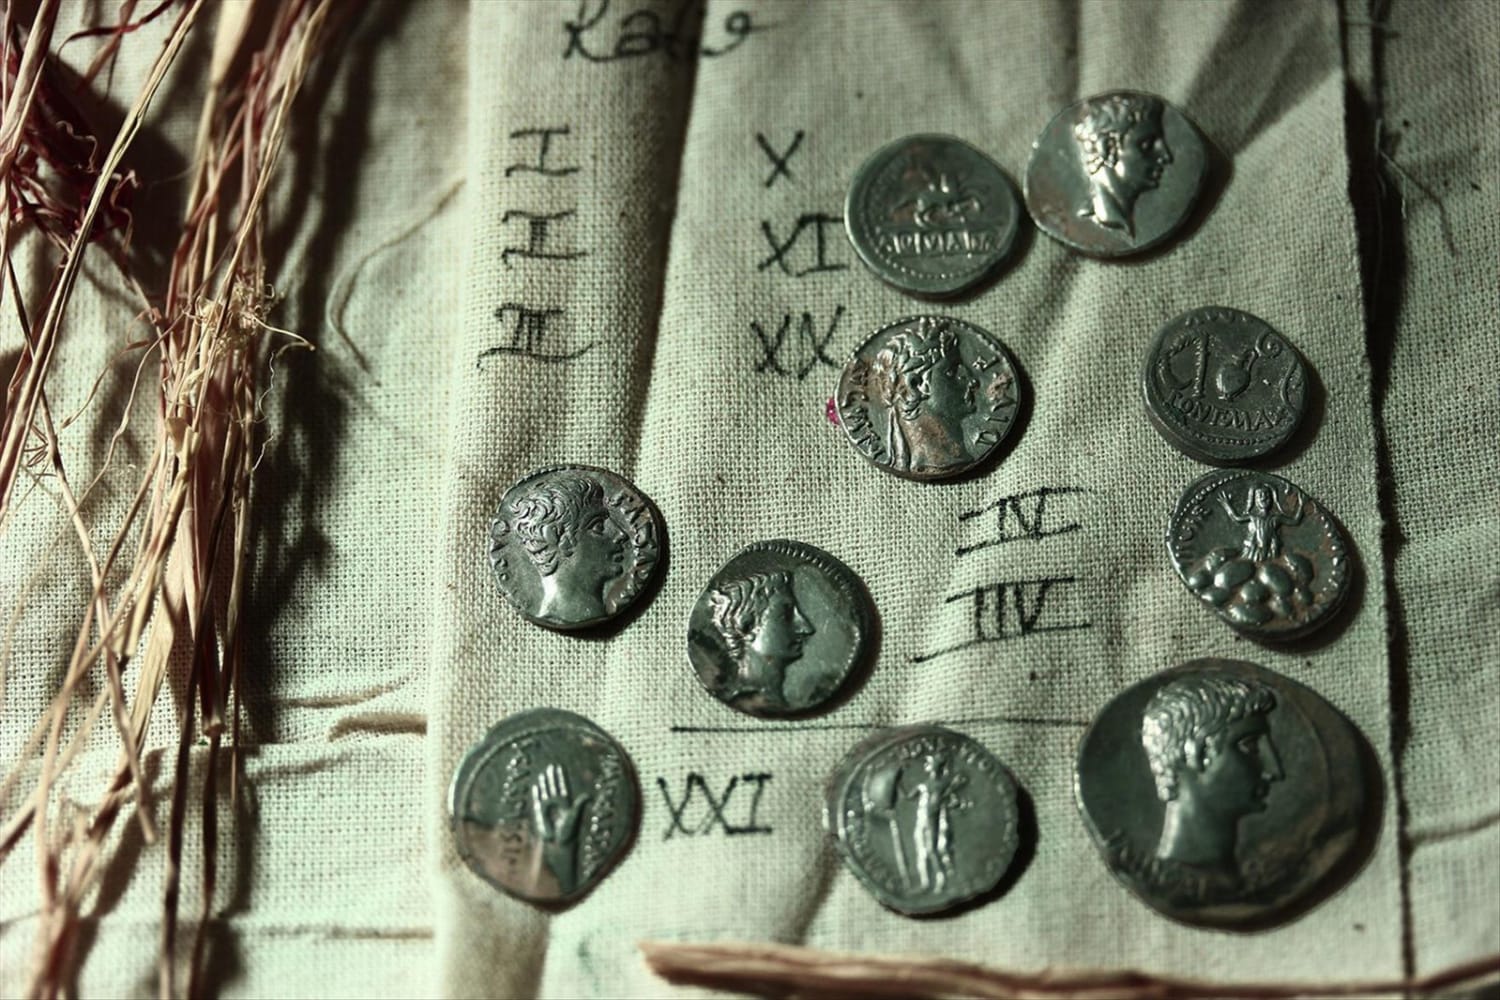 Trove of 650 Coins Bearing Likenesses of Caesar, Mark Antony Unearthed in Turkey